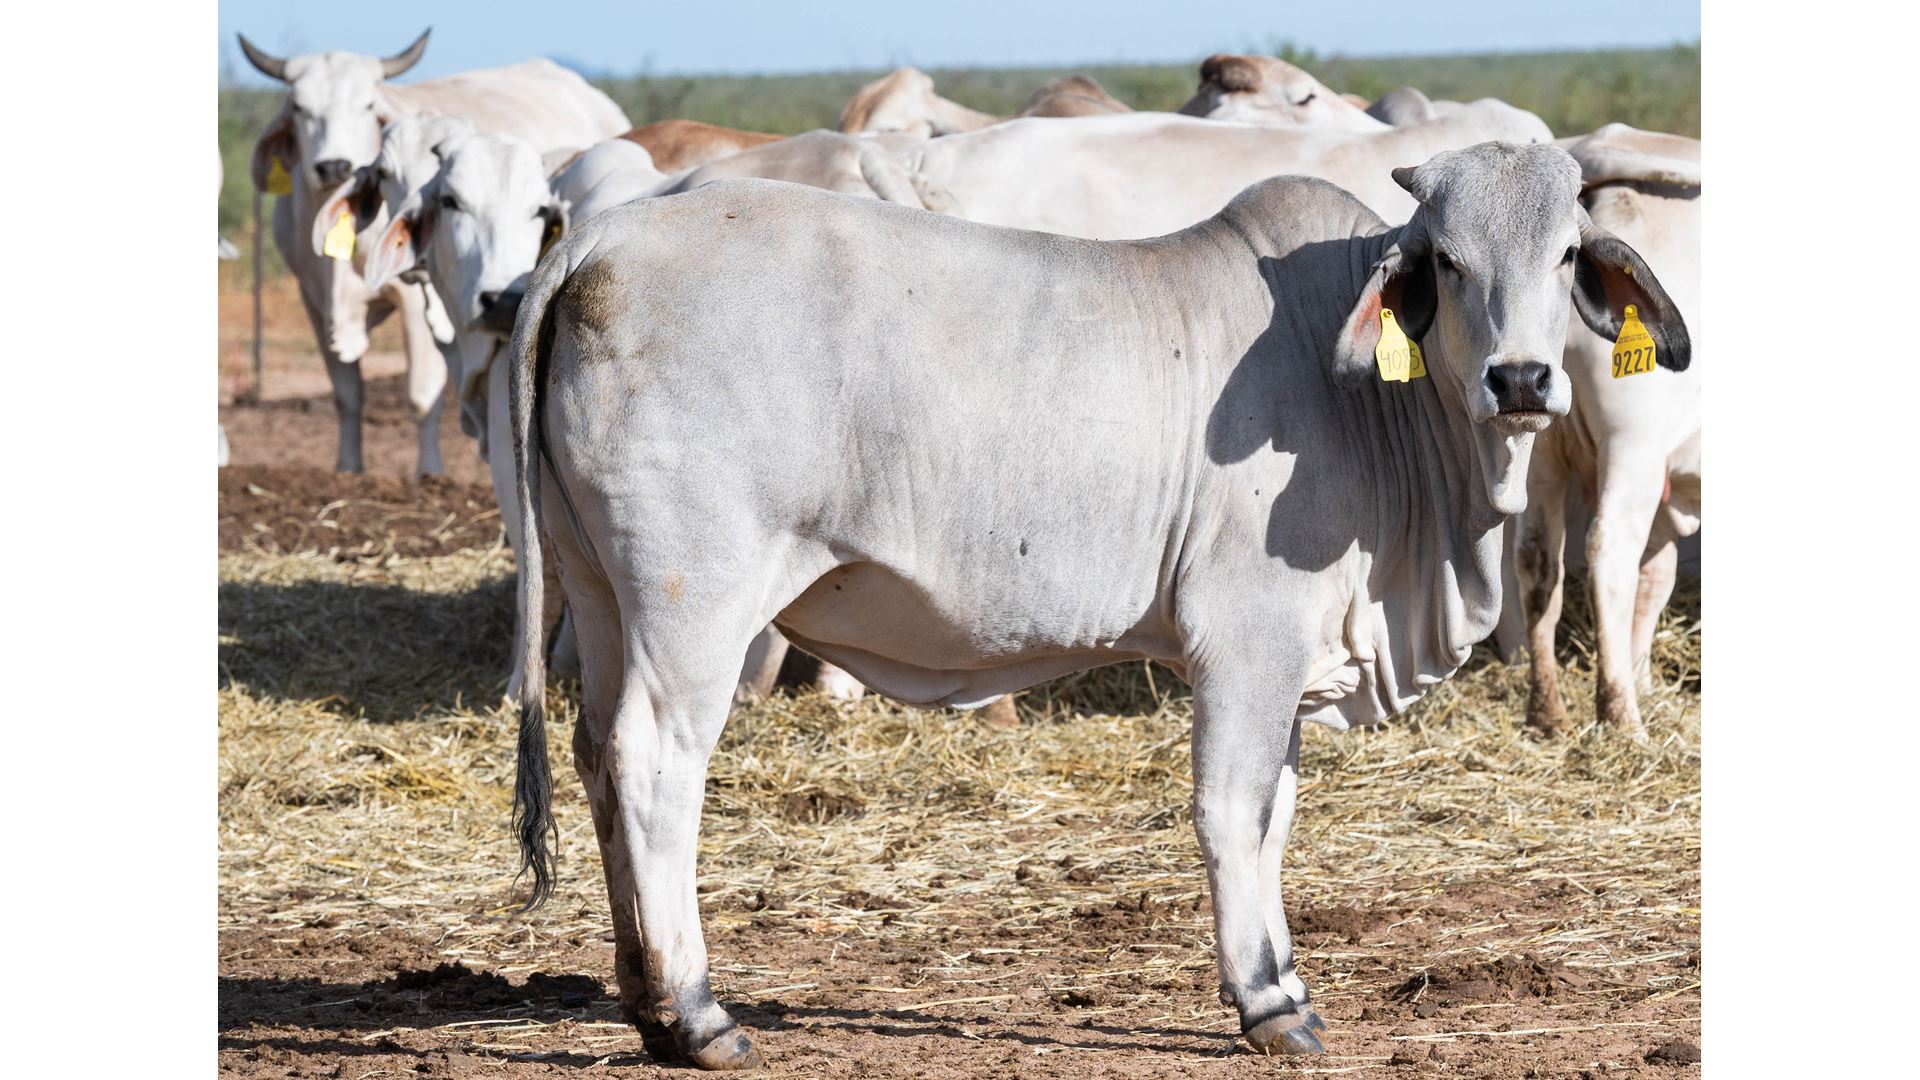 NMSU to co-host Southwest Beef Symposium set for March 11-12 in Tucumcari